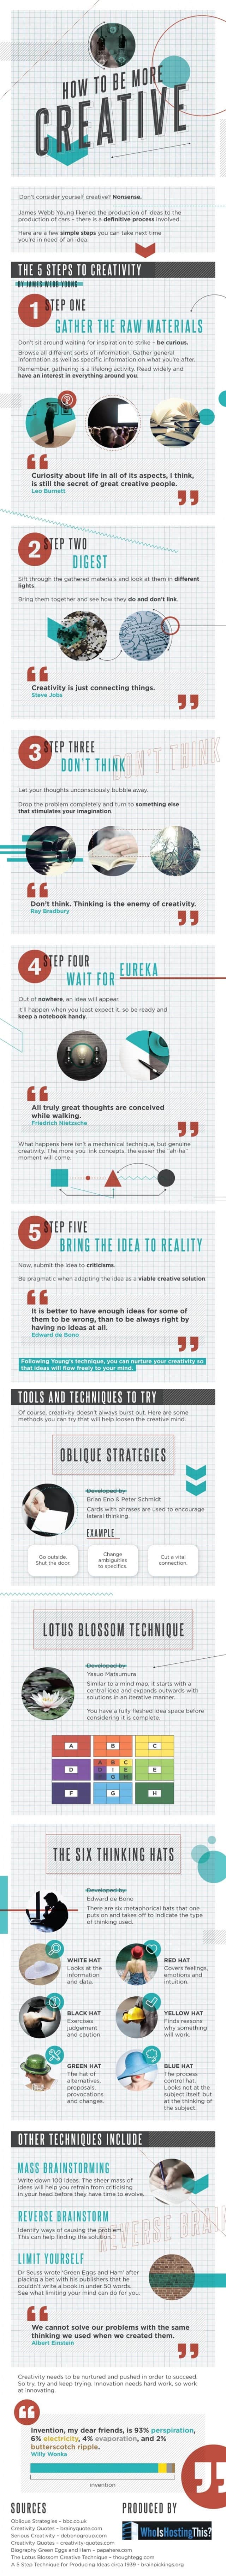 How To Be More Creative Infographic